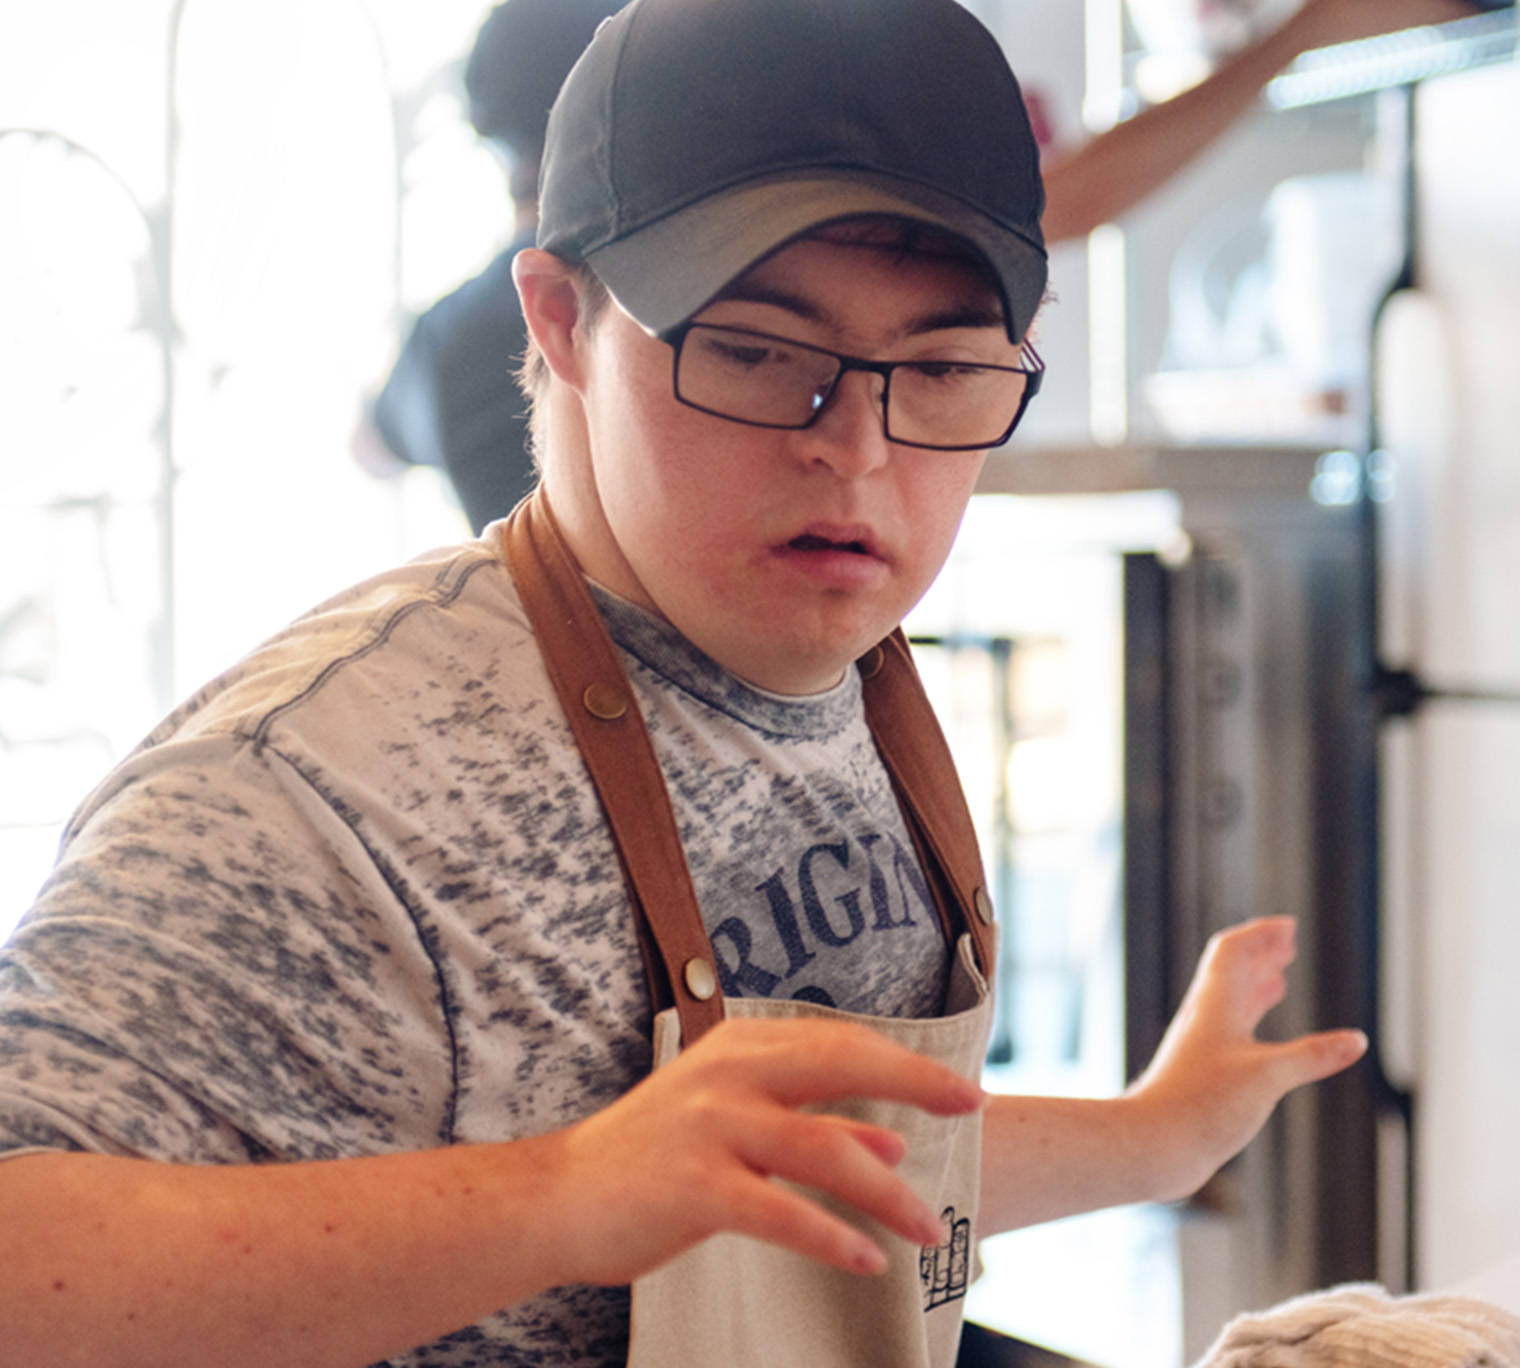 Person with disabilities working in restaurant kitchen.